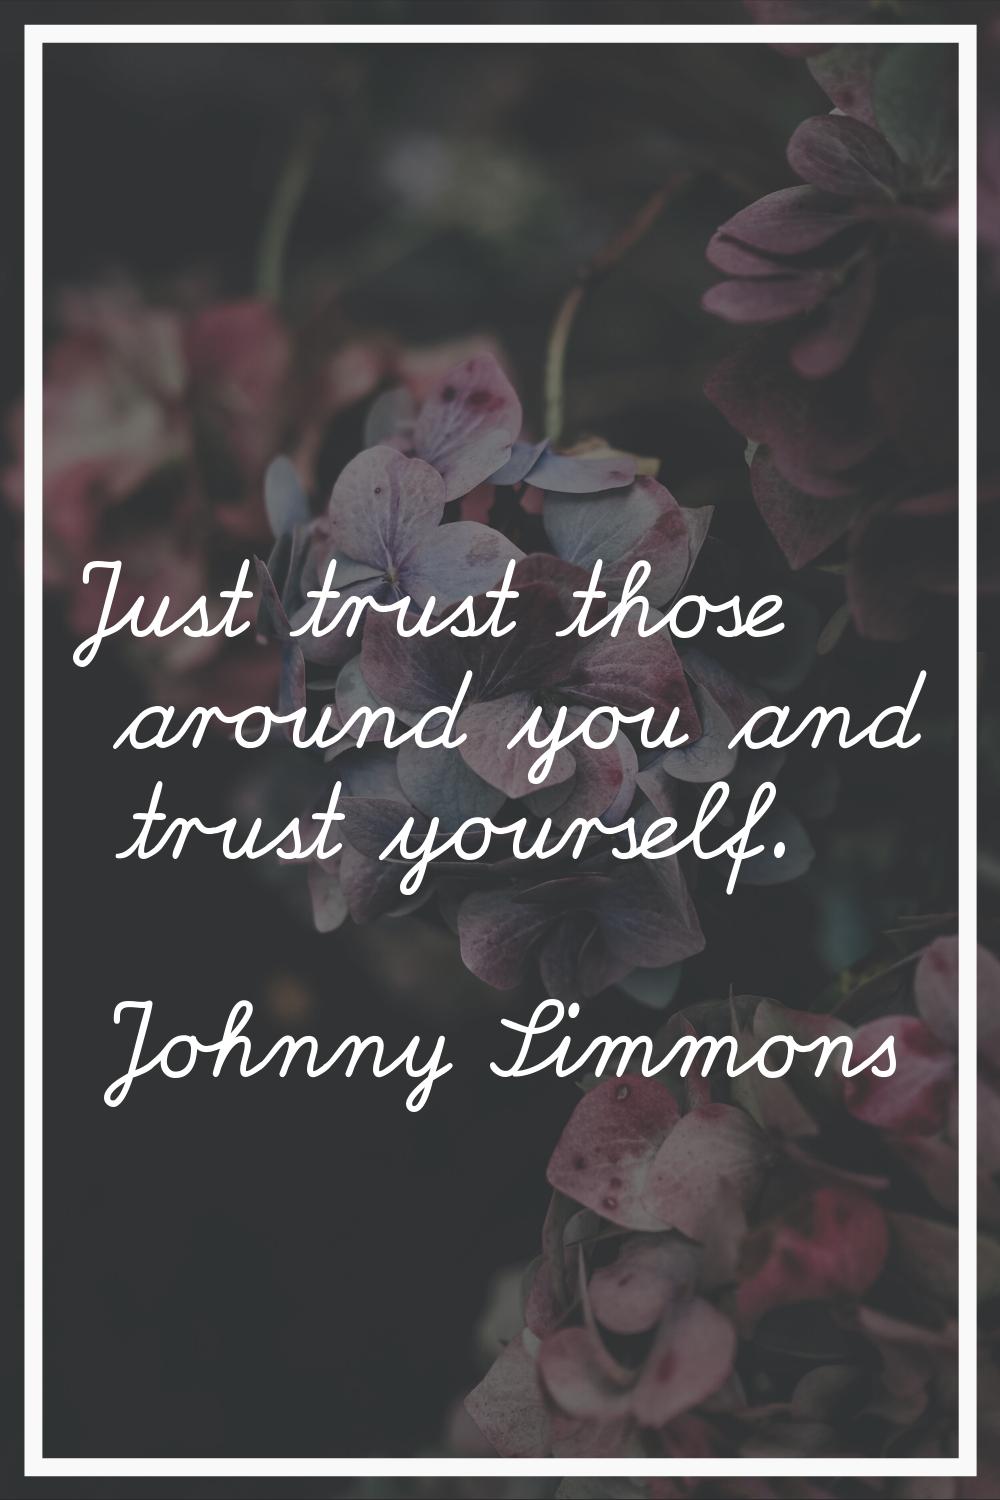 Just trust those around you and trust yourself.